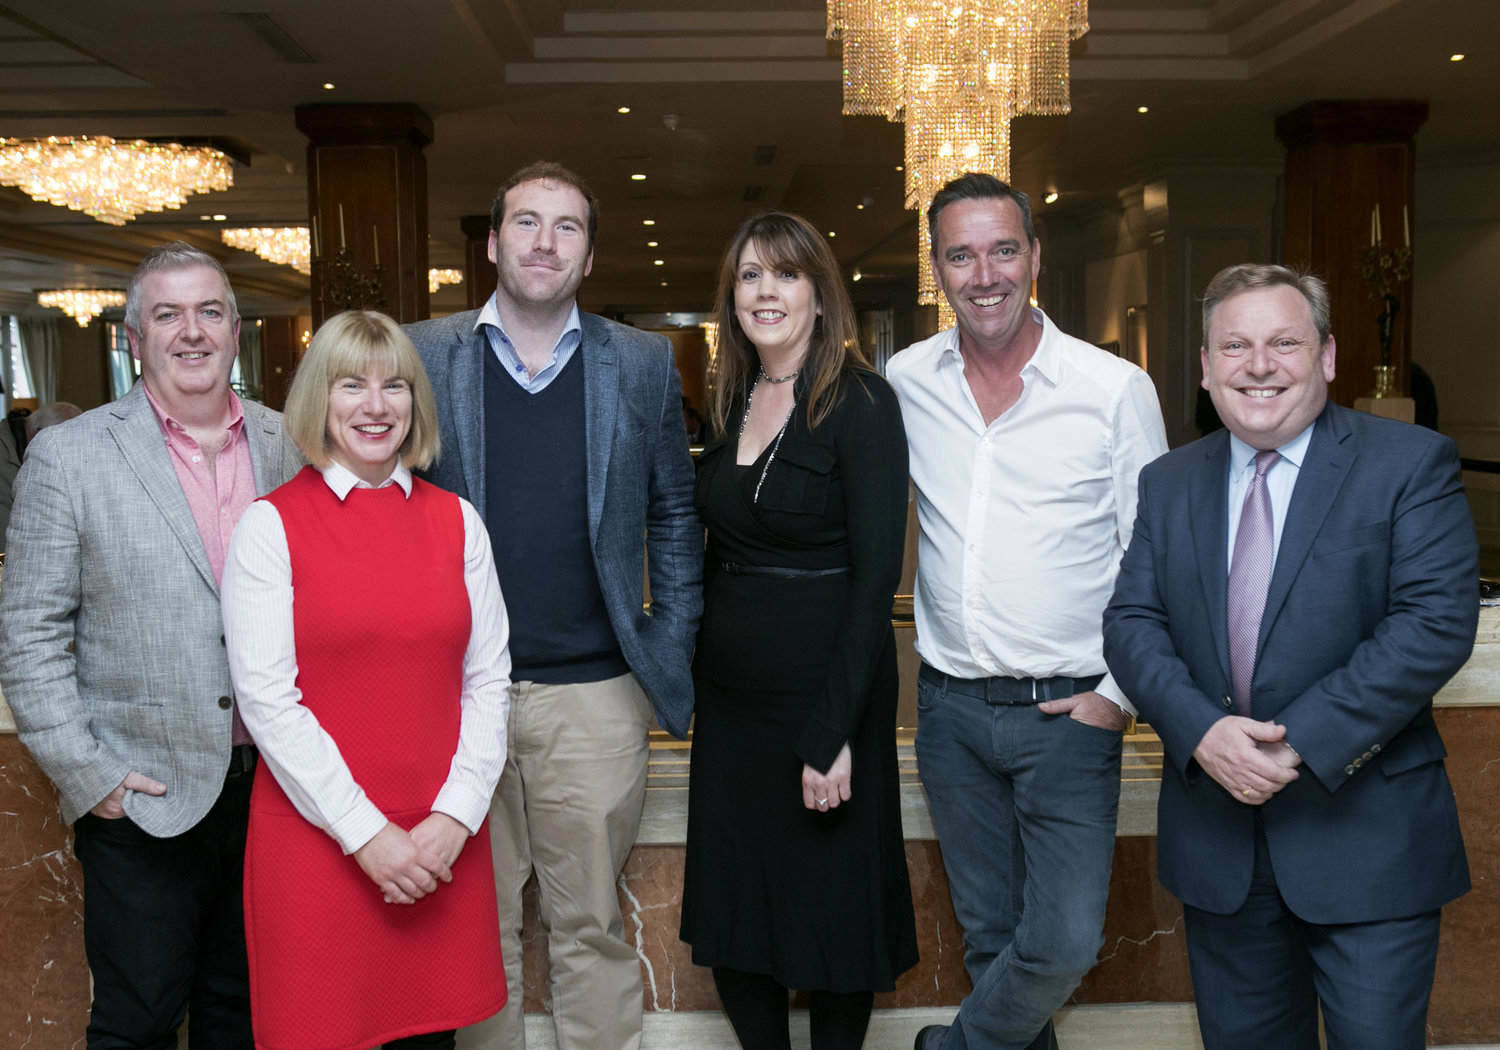 Speakers for the LVA's Food is the Future conference (from left): O'Donnell O'Neill’s Graham O'Donnell, Bord Bia’s Maureen Gahan, The Old Spot pub’s Stephen Cooney, LVA Chair Deirdre Devitt, celebrity chef Kevin Dundon of Arthurstown Brewing Co and Musgrave Food Services Noel Keeley.